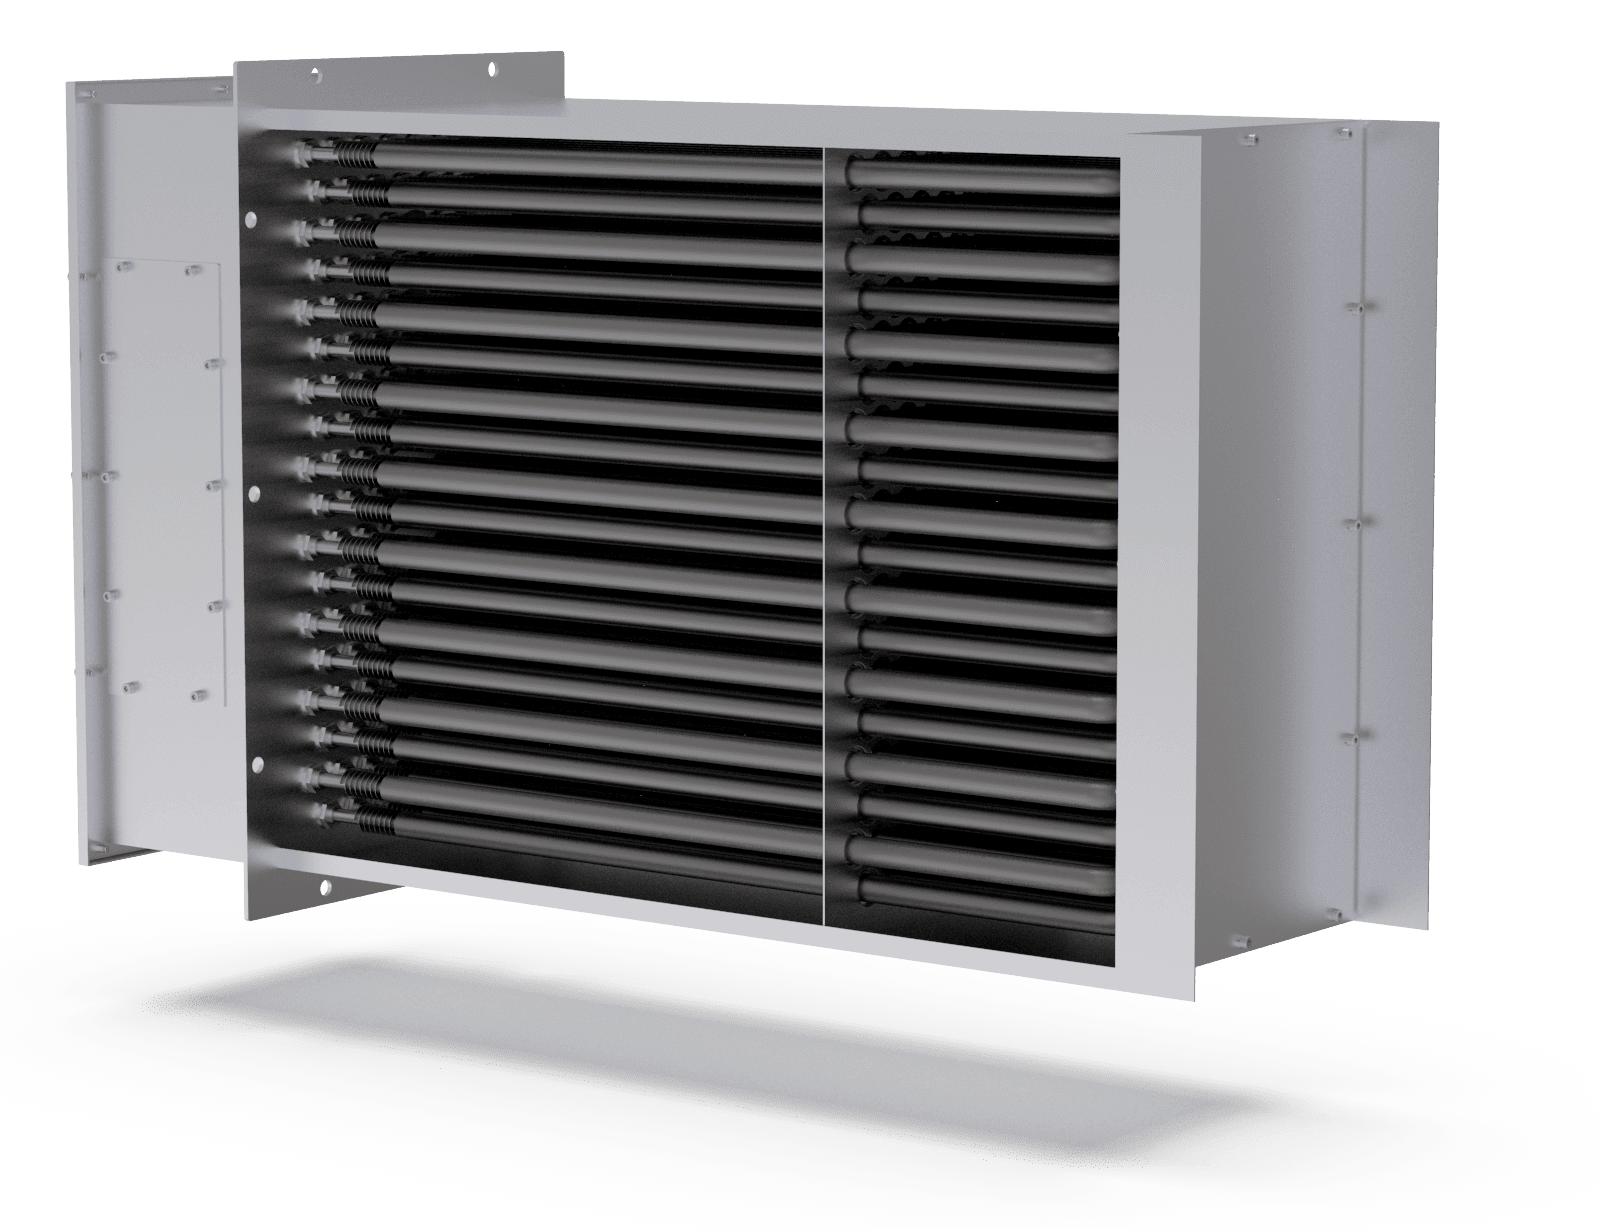 INDUSTRIAL DRYING HEATER